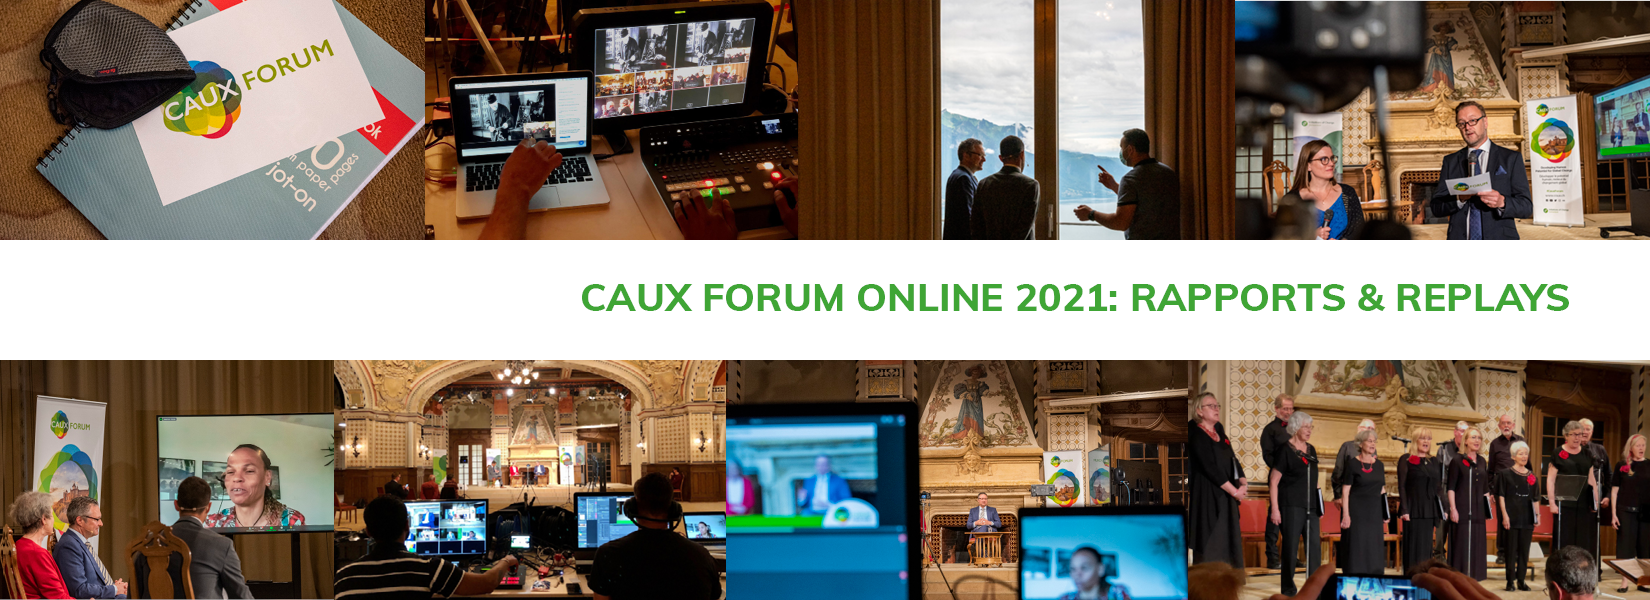 Caux Forum 2021 homepage reports & replays FR